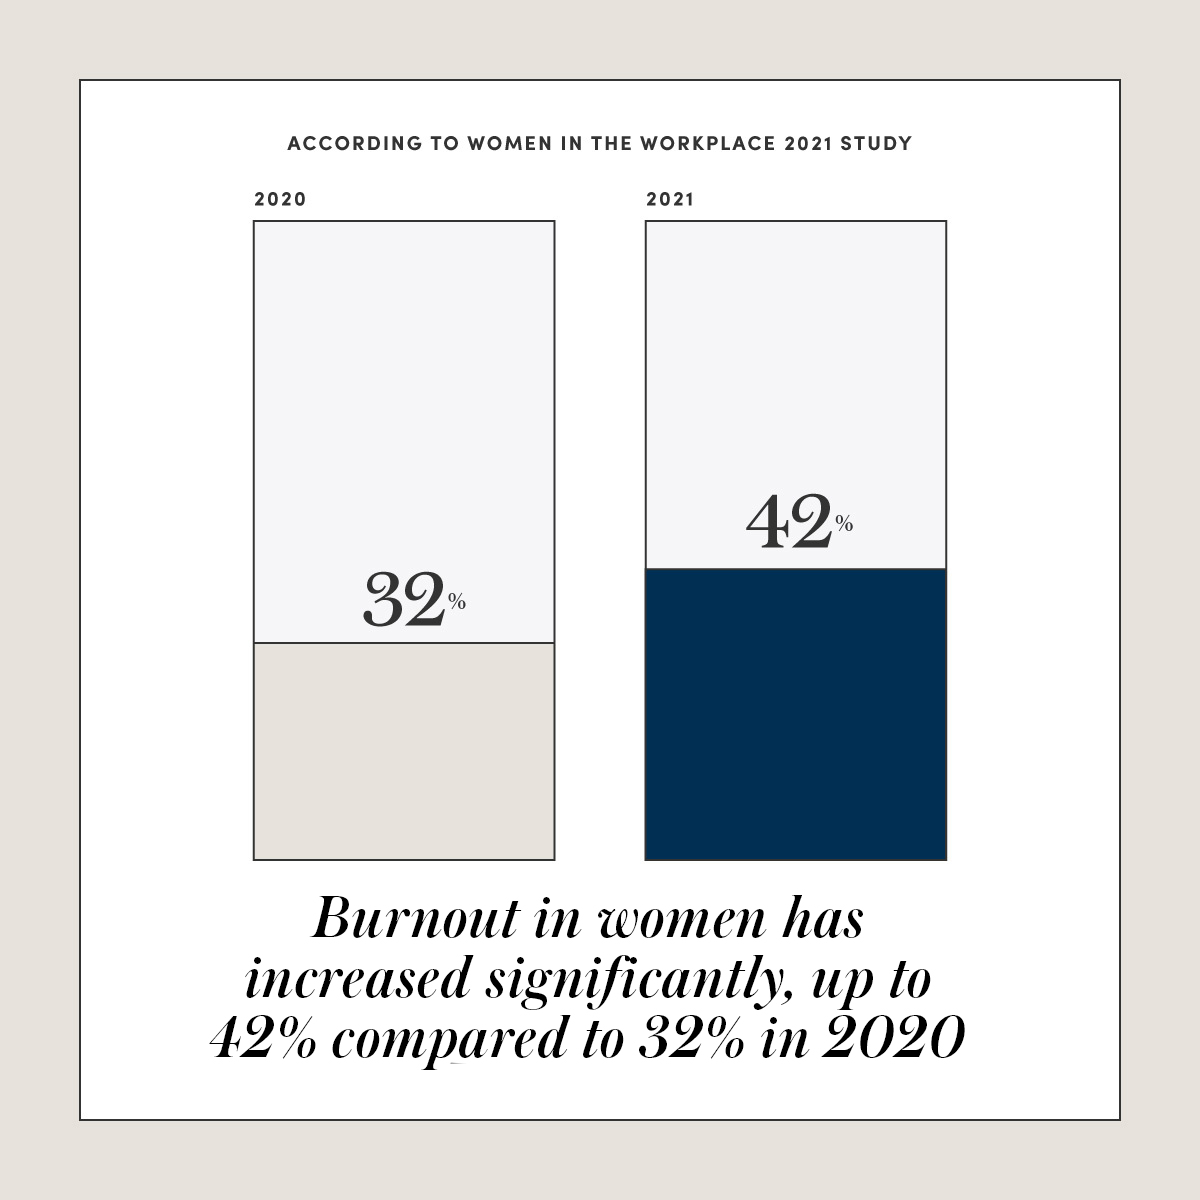 According to women in the workplace 2021 survey, burnout in women has increased significantly, up to 42% compared to 32% in 2020